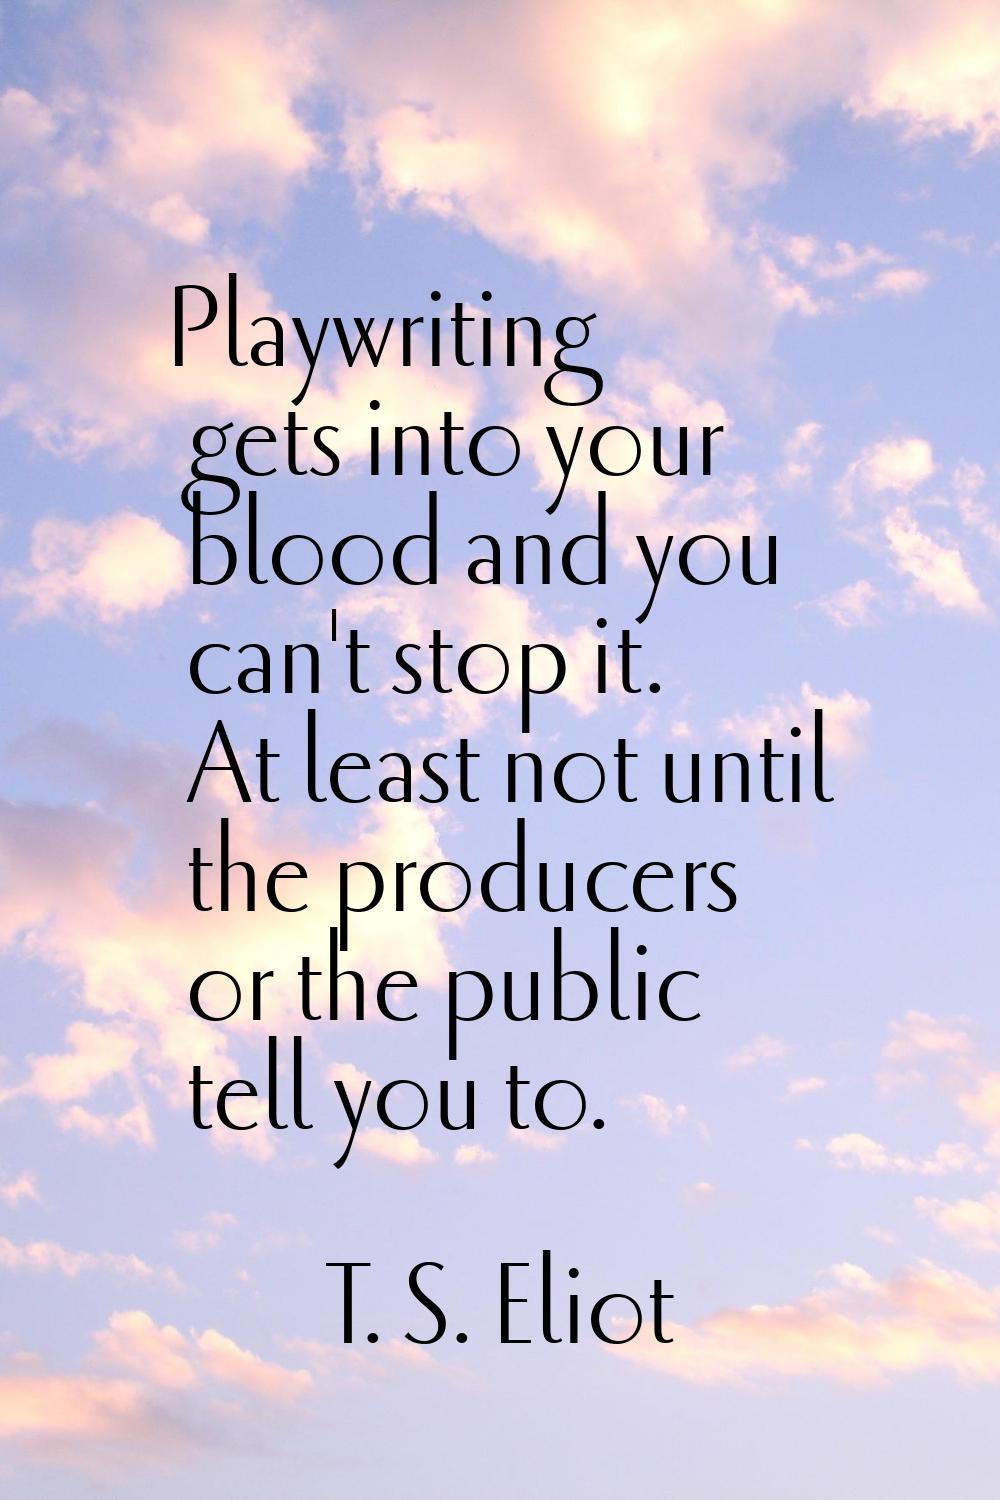 Playwriting gets into your blood and you can't stop it. At least not until the producers or the pub